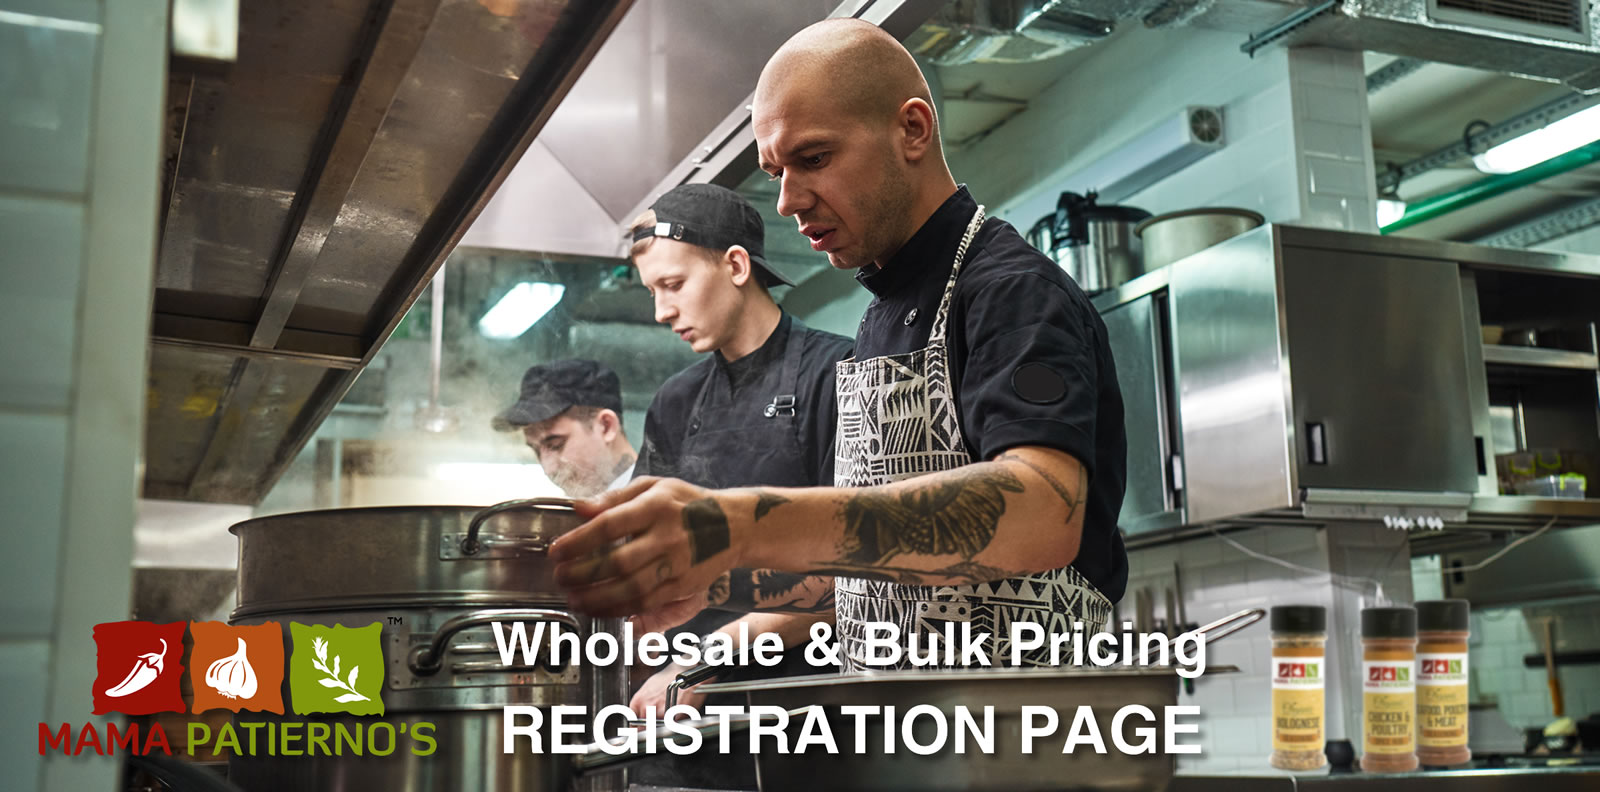 Mama Patierno's Wholesale and Bulk Pricing Registration page header.